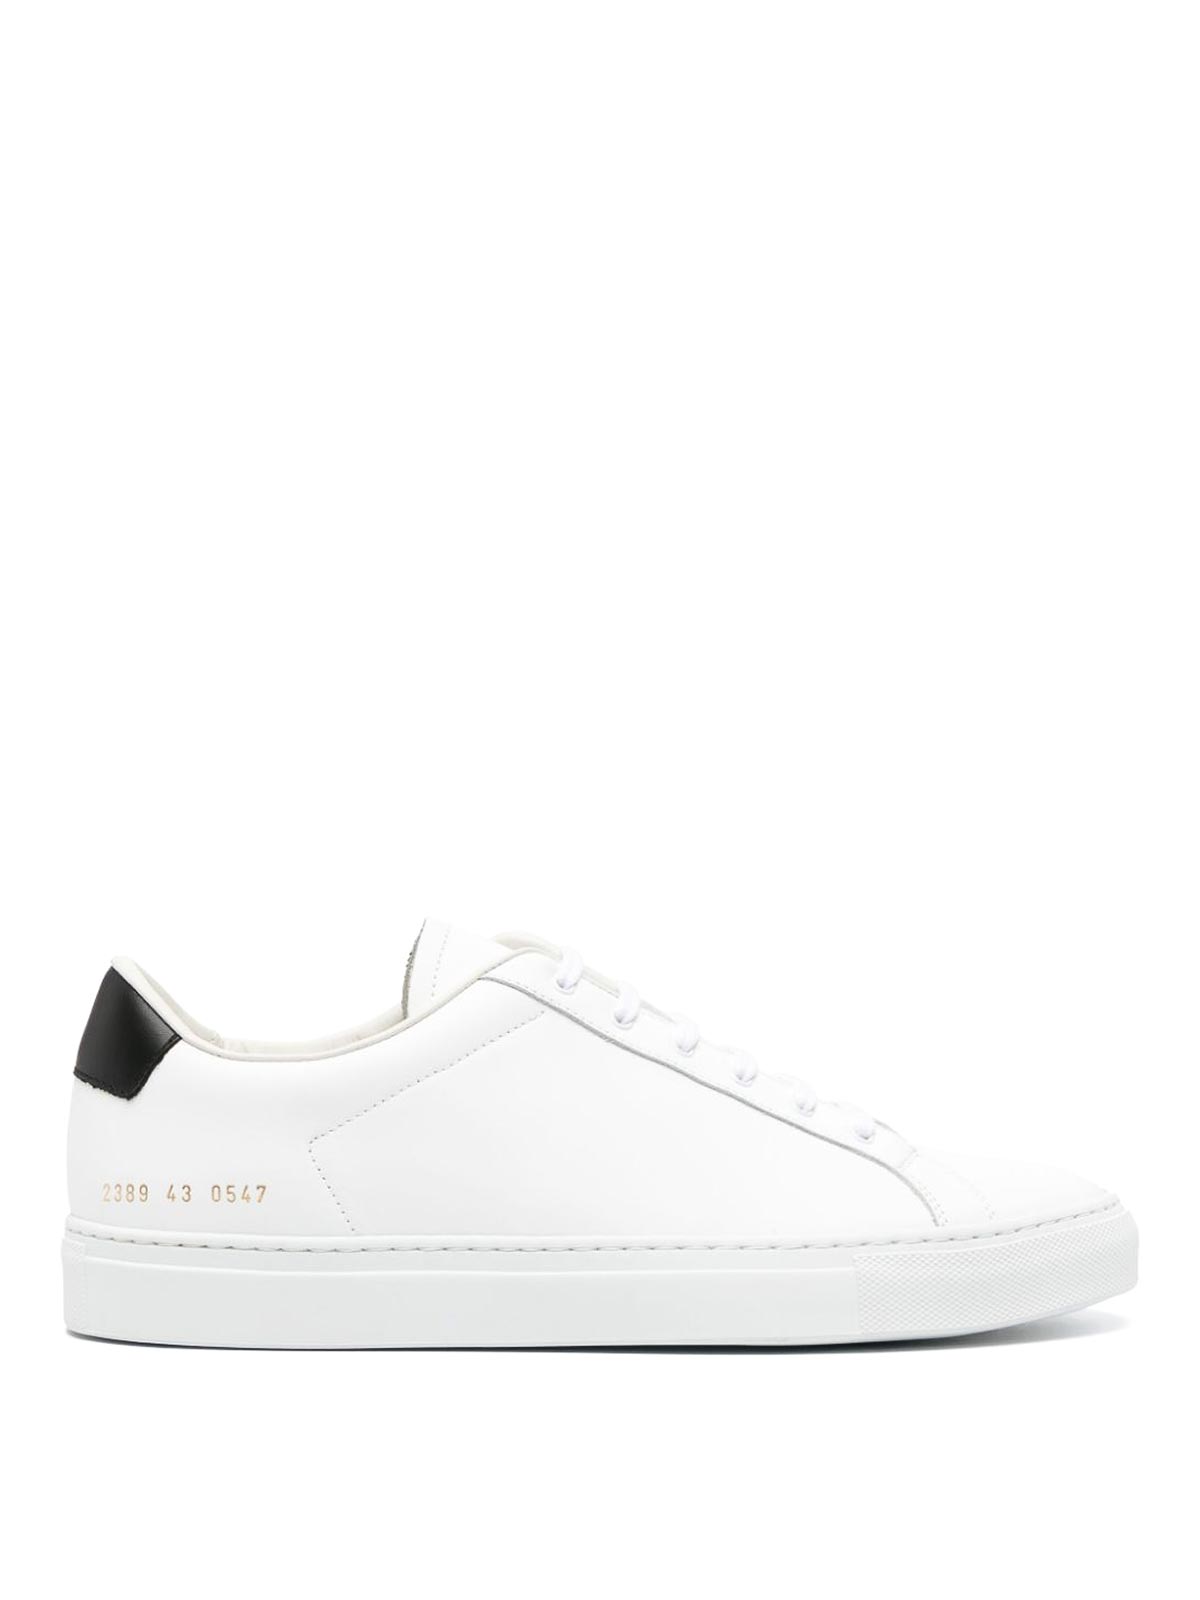 Common Projects Retro Lace-up Sneakers In Black